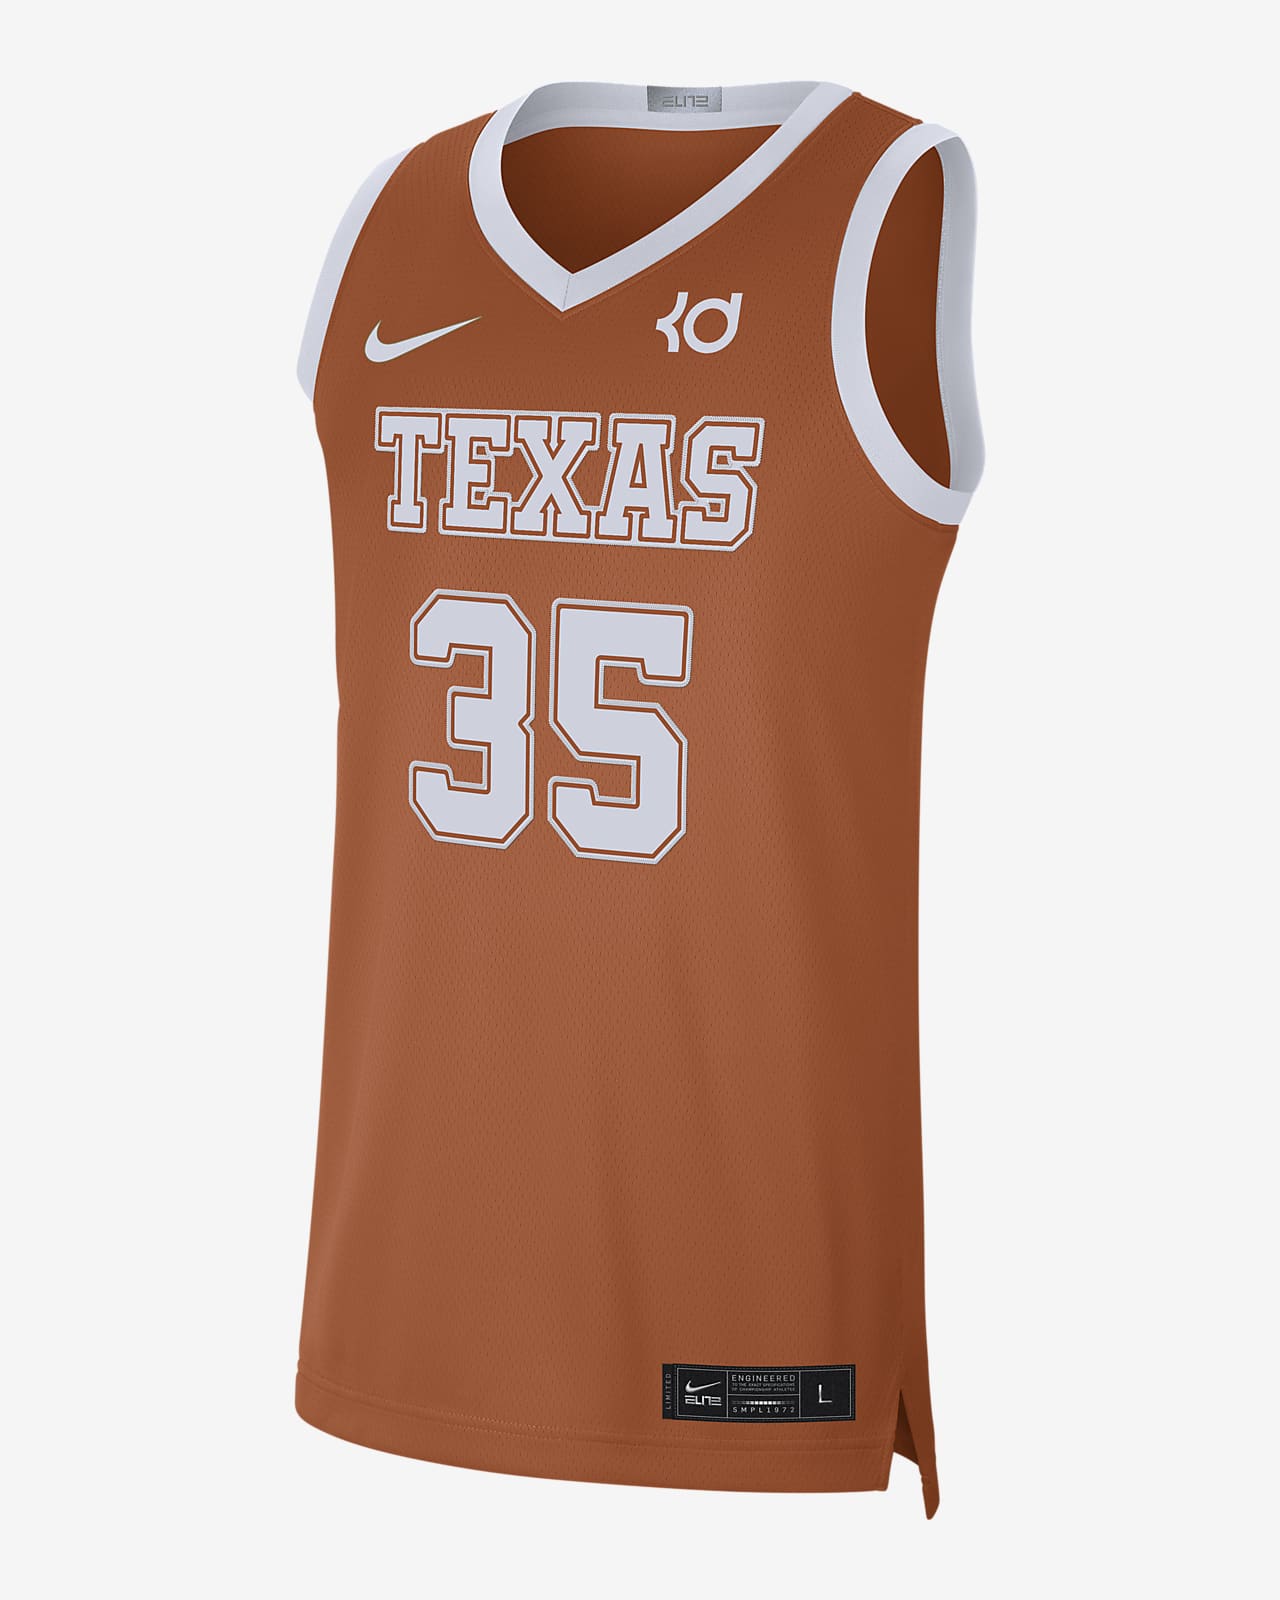 Nike College Dri-FIT (Texas) (Kevin Durant) Men's Limited Jersey.